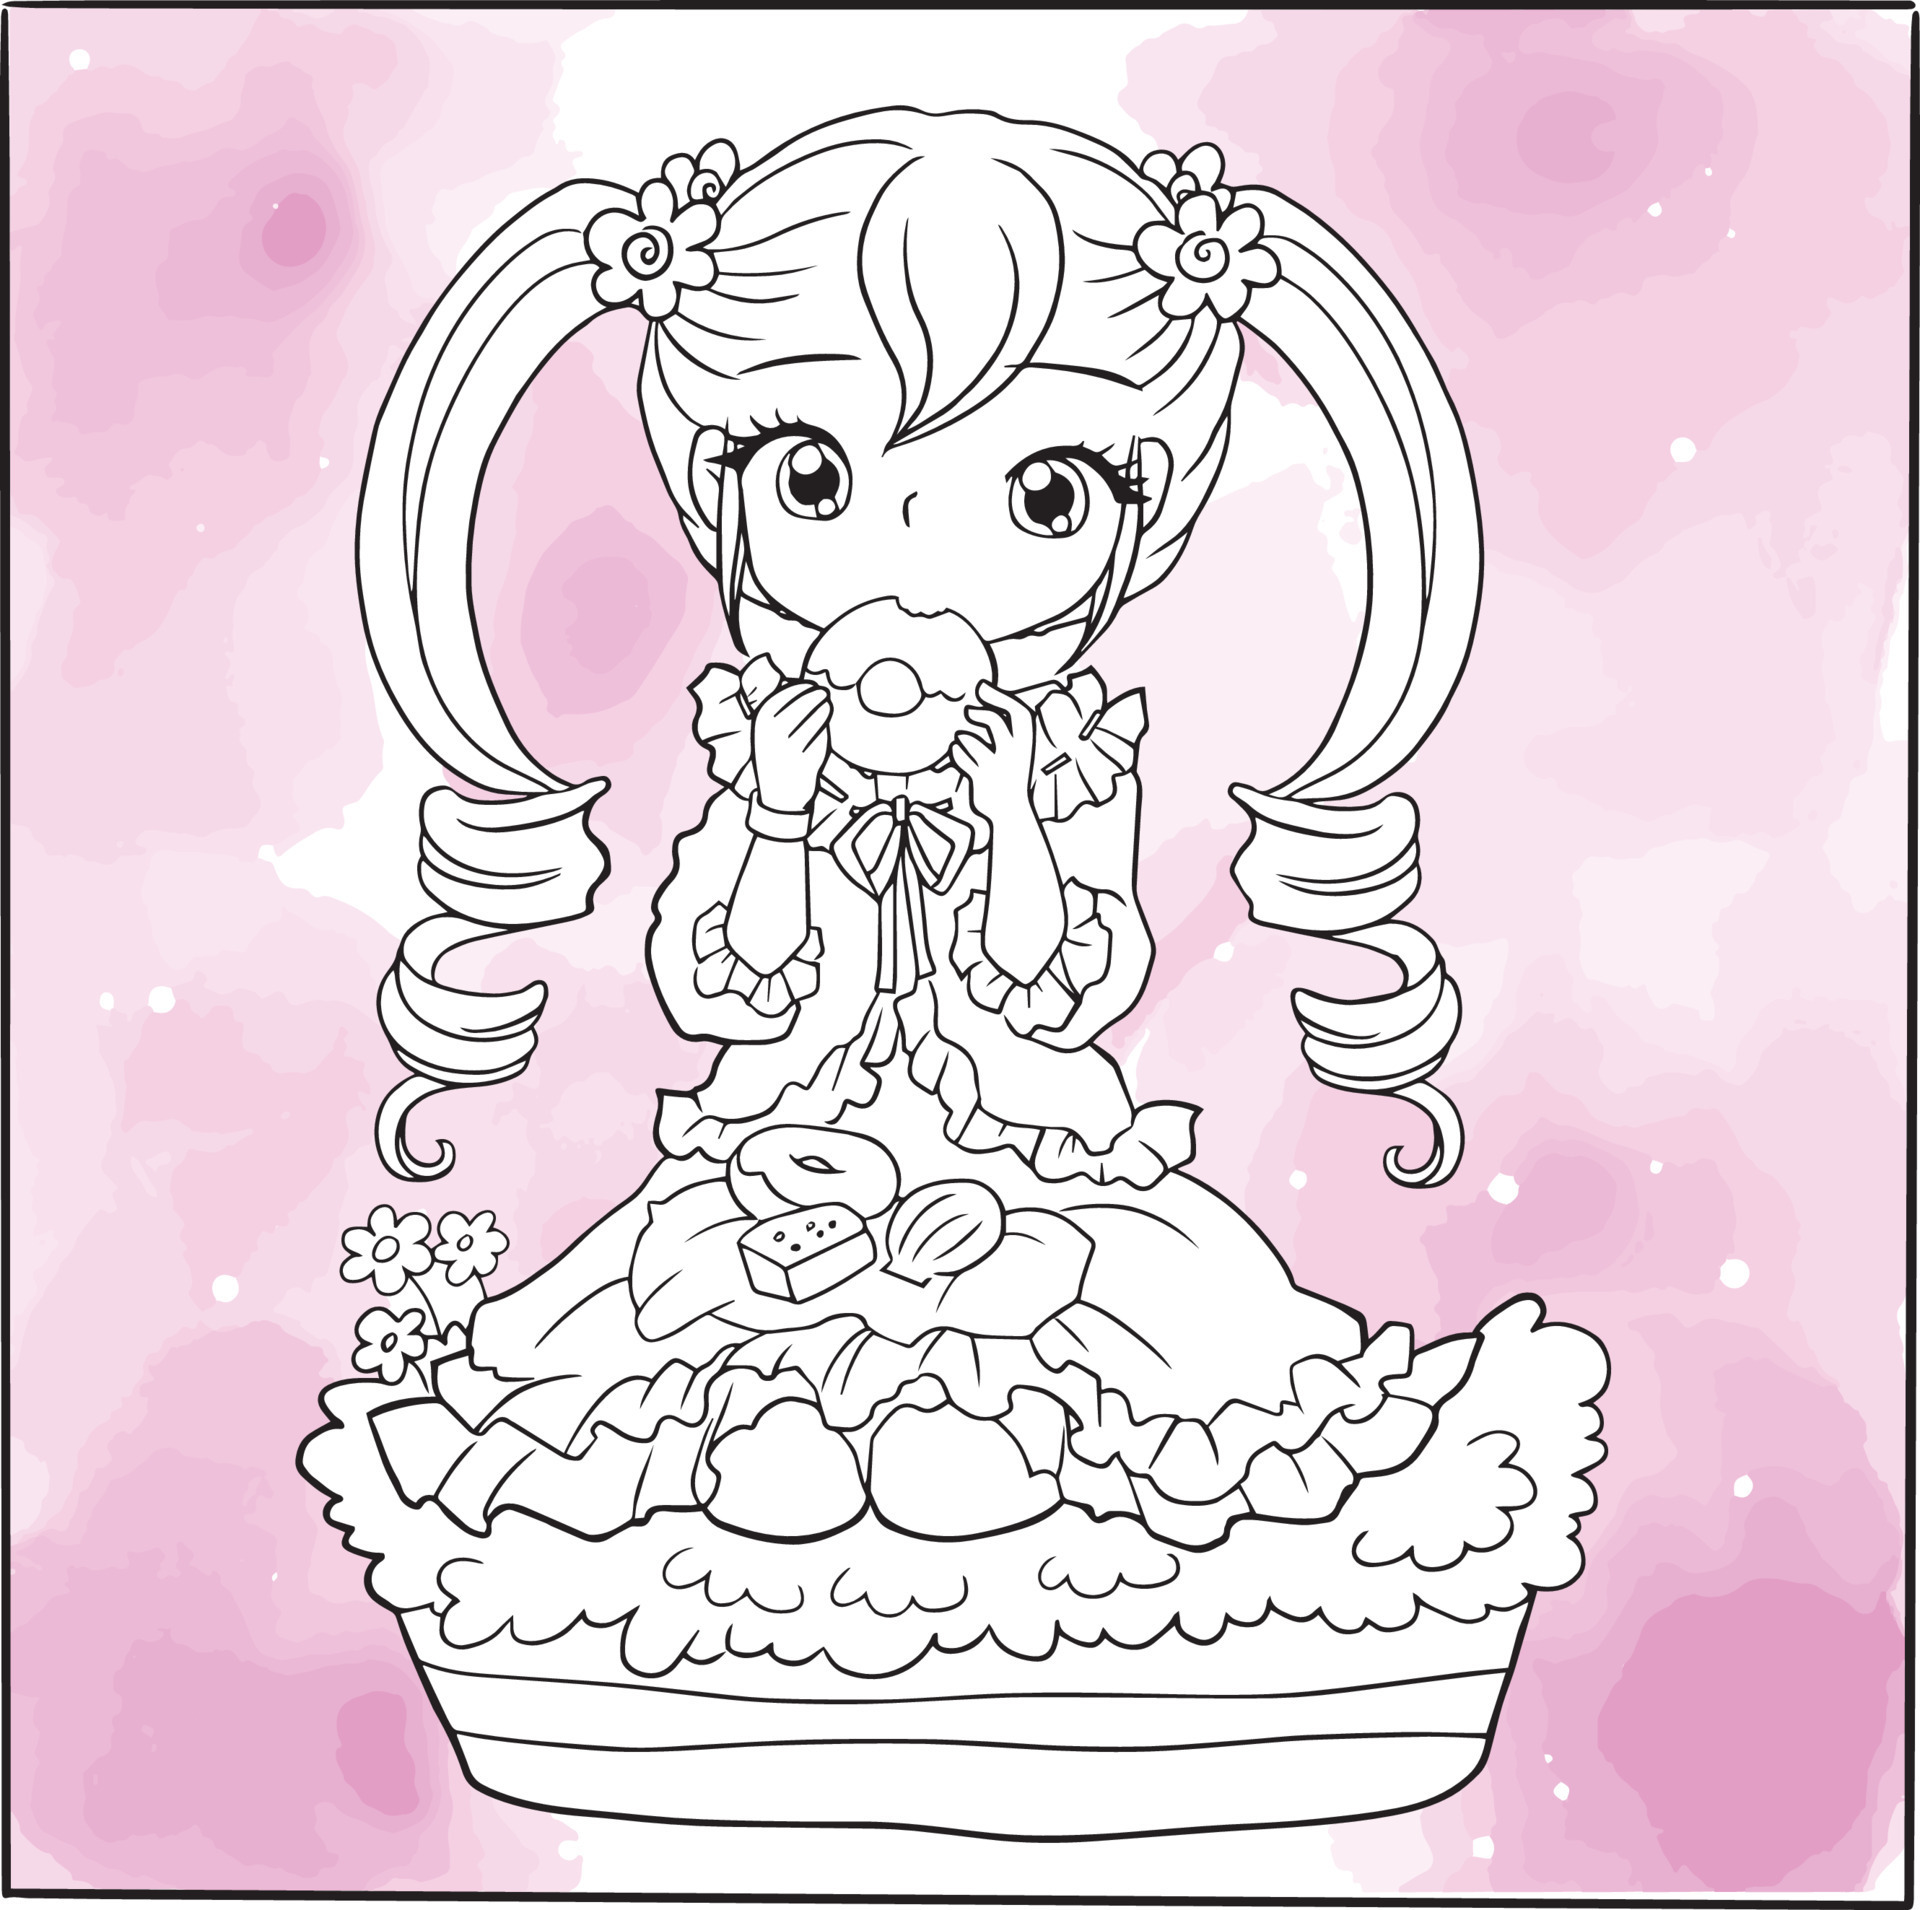   Kawaii Anime Coloring Pages Best